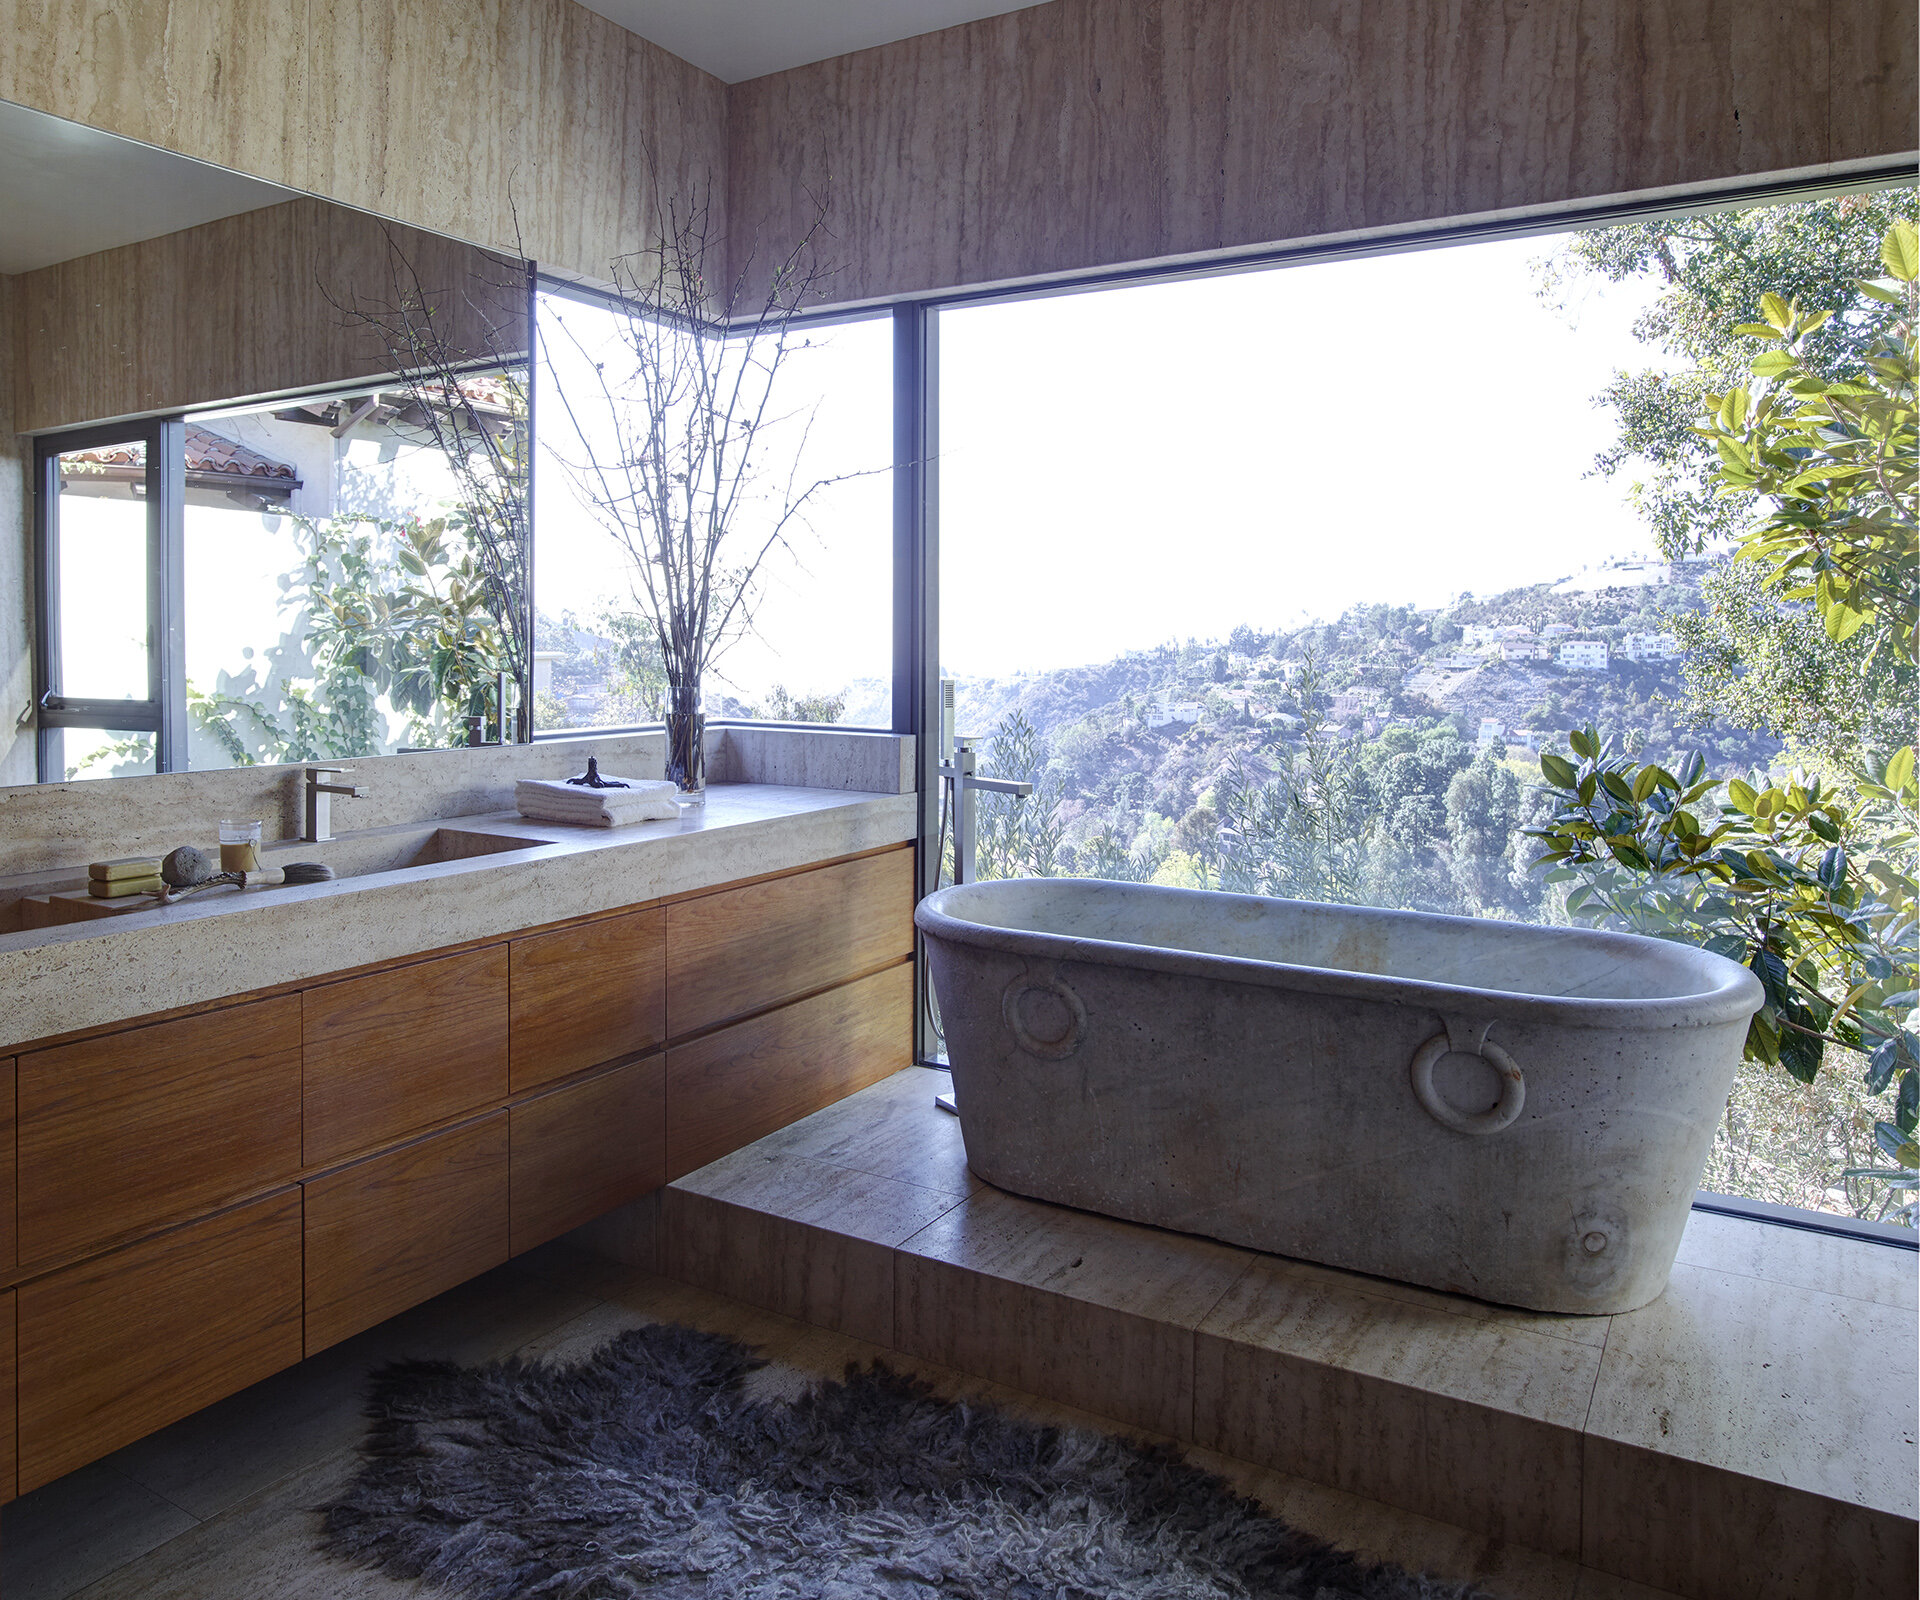  Luxury general contractor award winning architectural modern home for celebrity photographer in the Hollywood Hills neighborhood of Los Angeles featuring glamorous master bathroom suite with Italian bathtub and mountain views.  